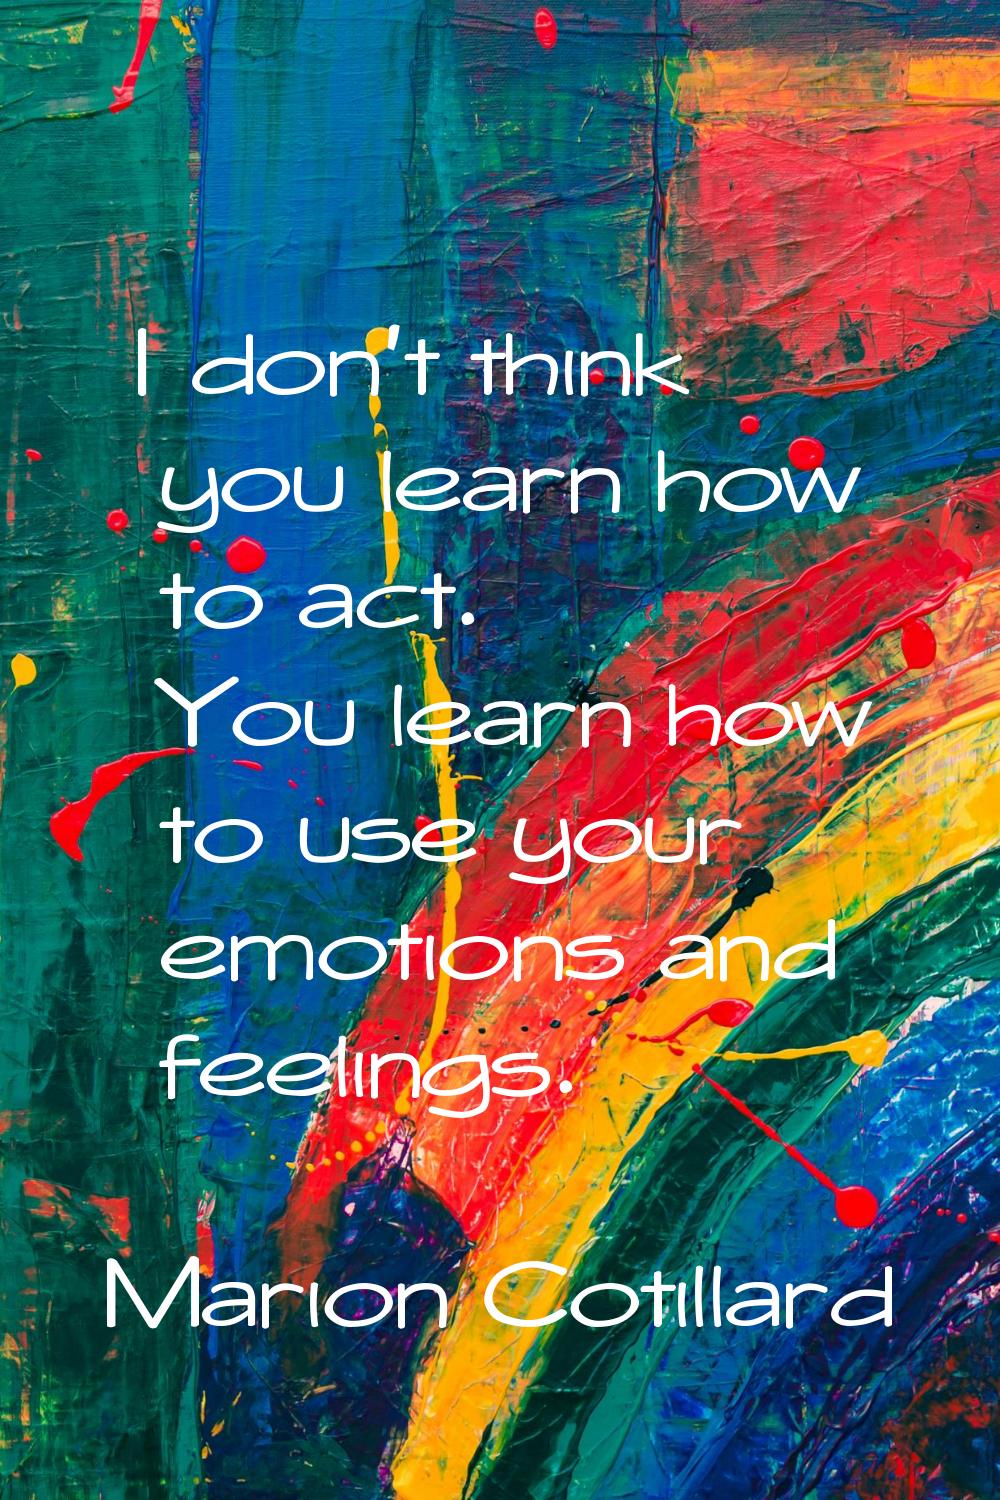 I don't think you learn how to act. You learn how to use your emotions and feelings.